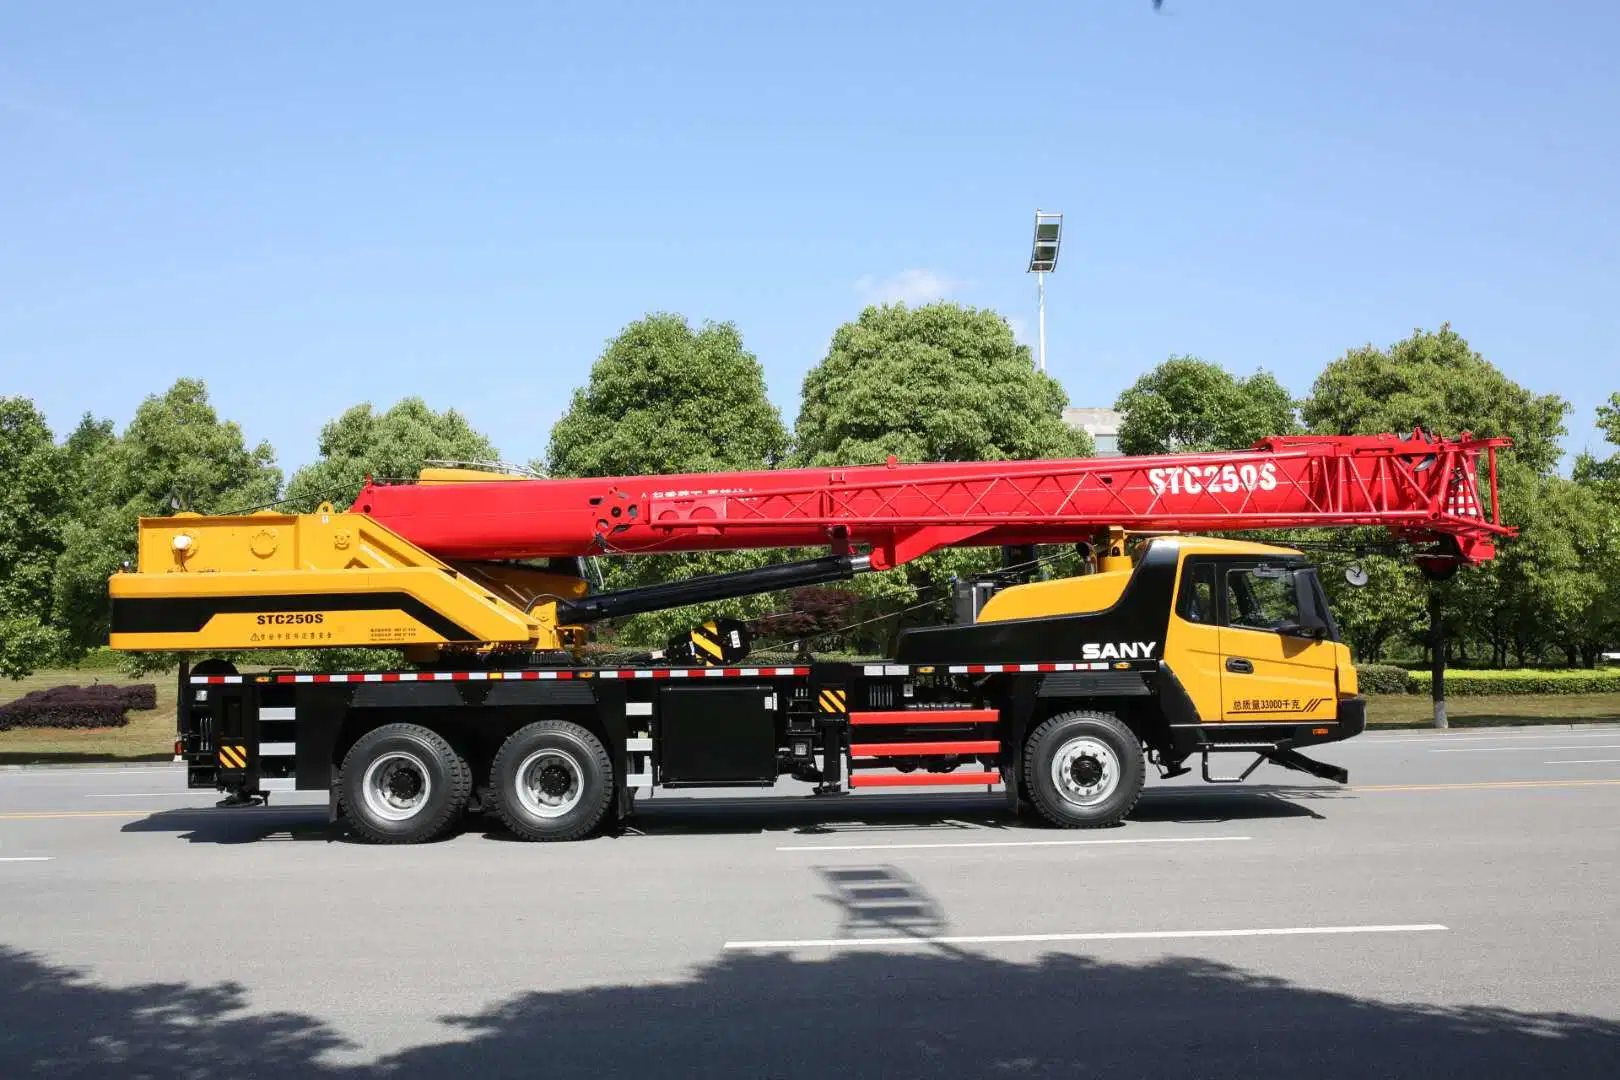 50 Tons Stc500, 80 Tons Stc800, 100 Tons Stc1000 Truck Cranes